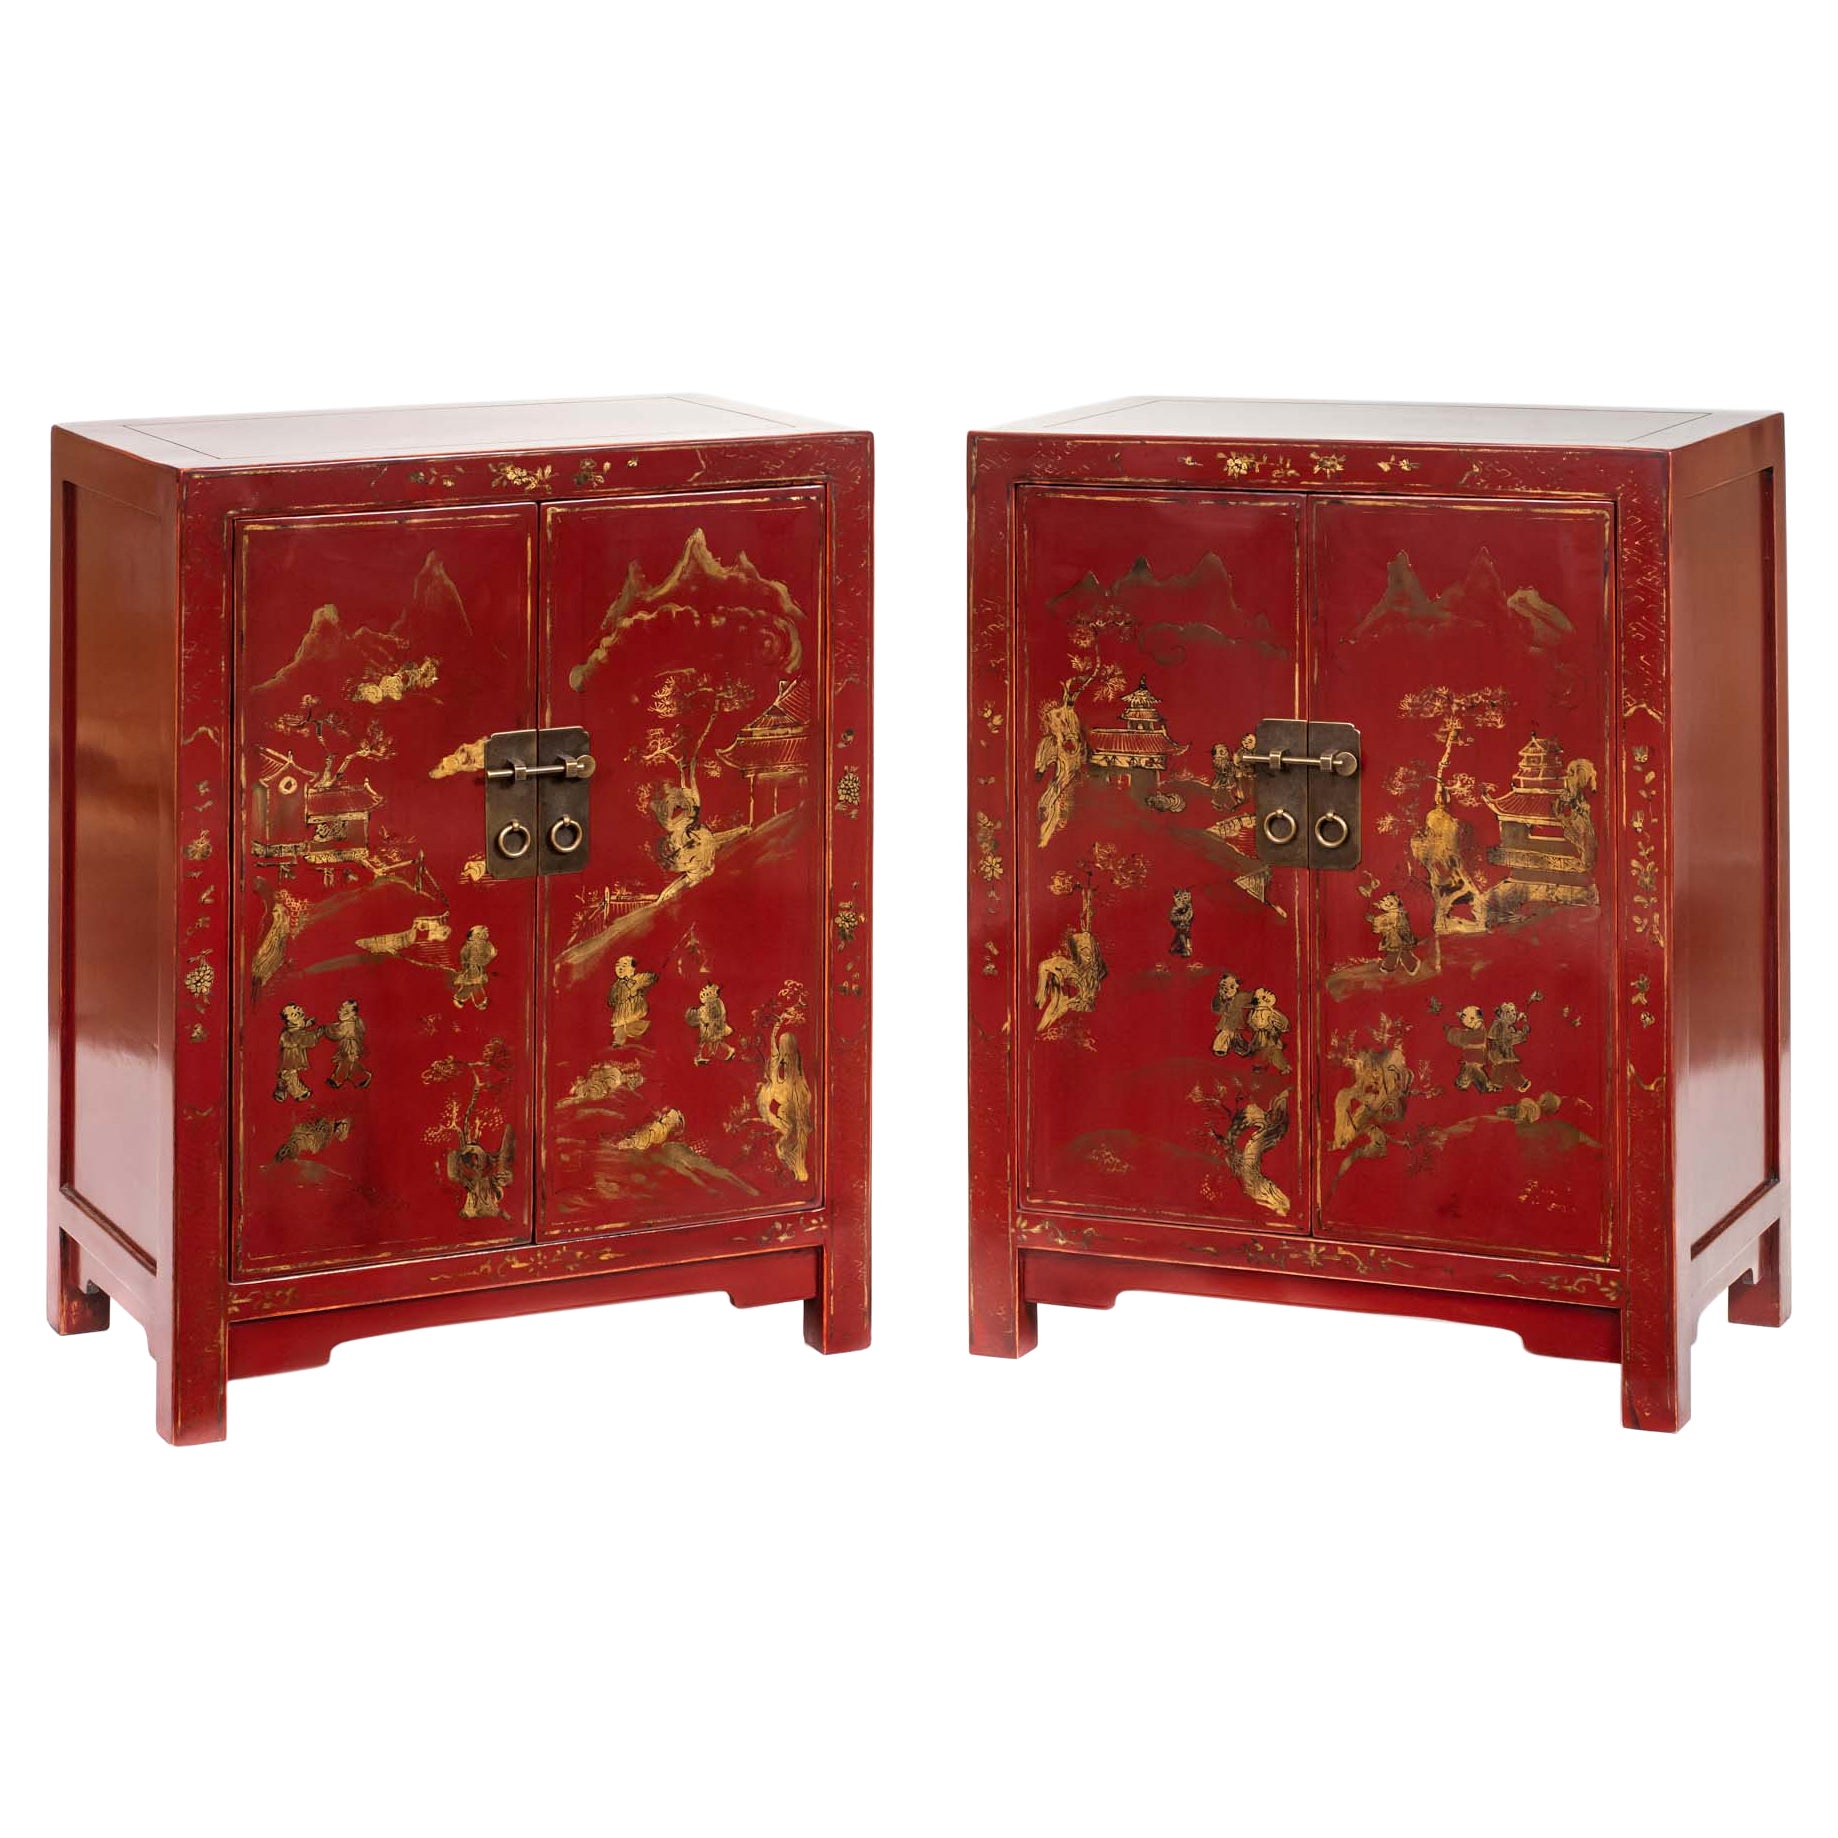 Pair of Small Red Lacquer Cabinets Handpainted with Gilt Children in Courtyard